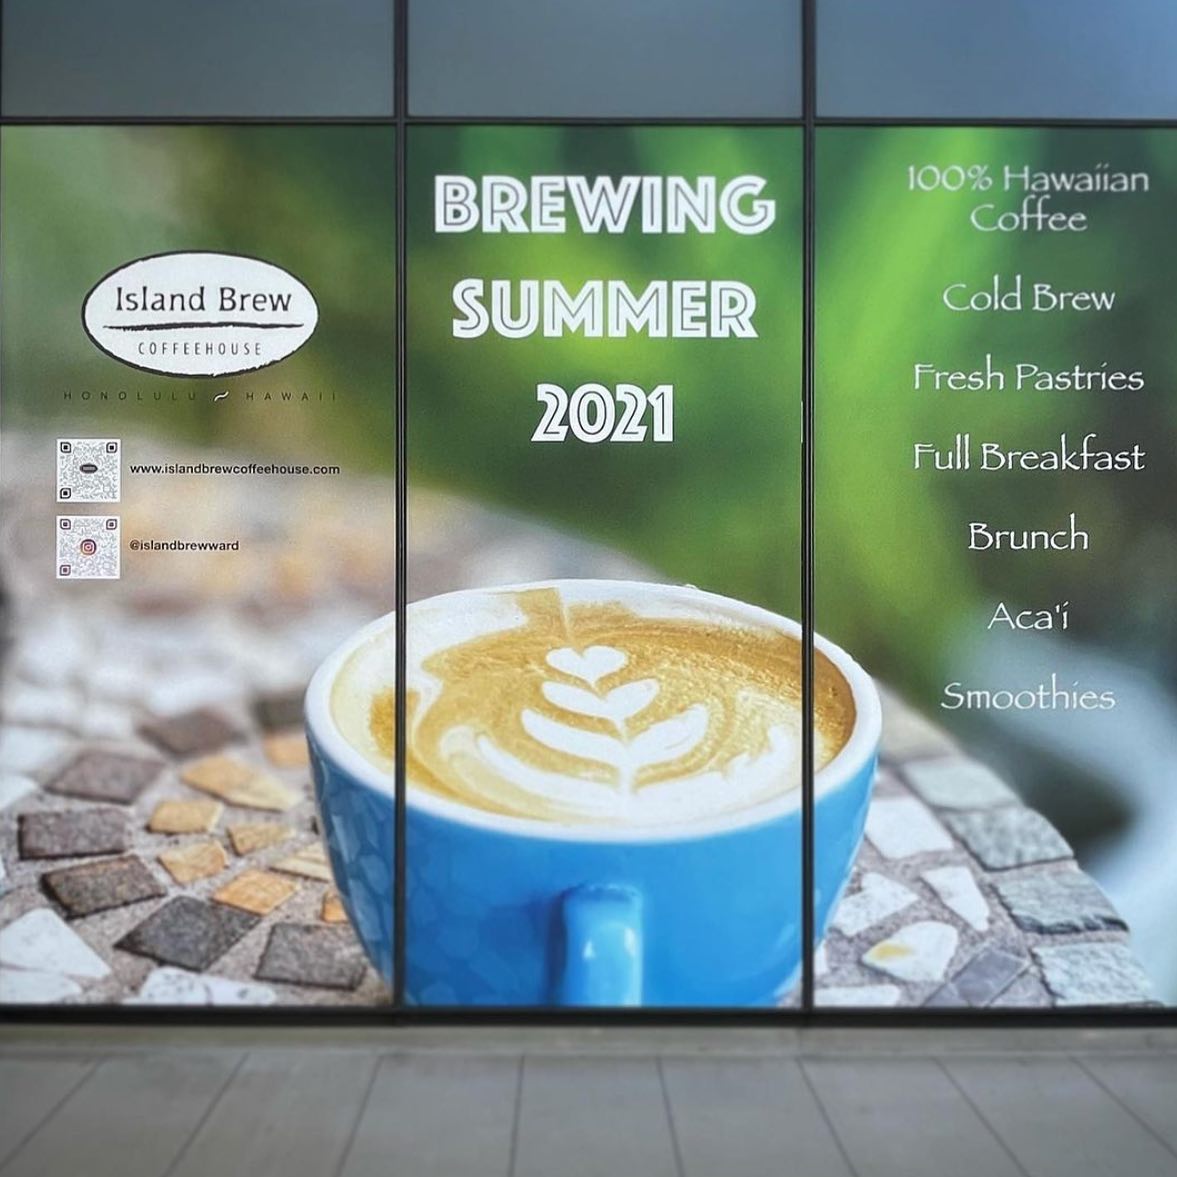 We have some things brewing for Summer 2021… Island Brew Coffeehouse is opening in Anaha Shops!